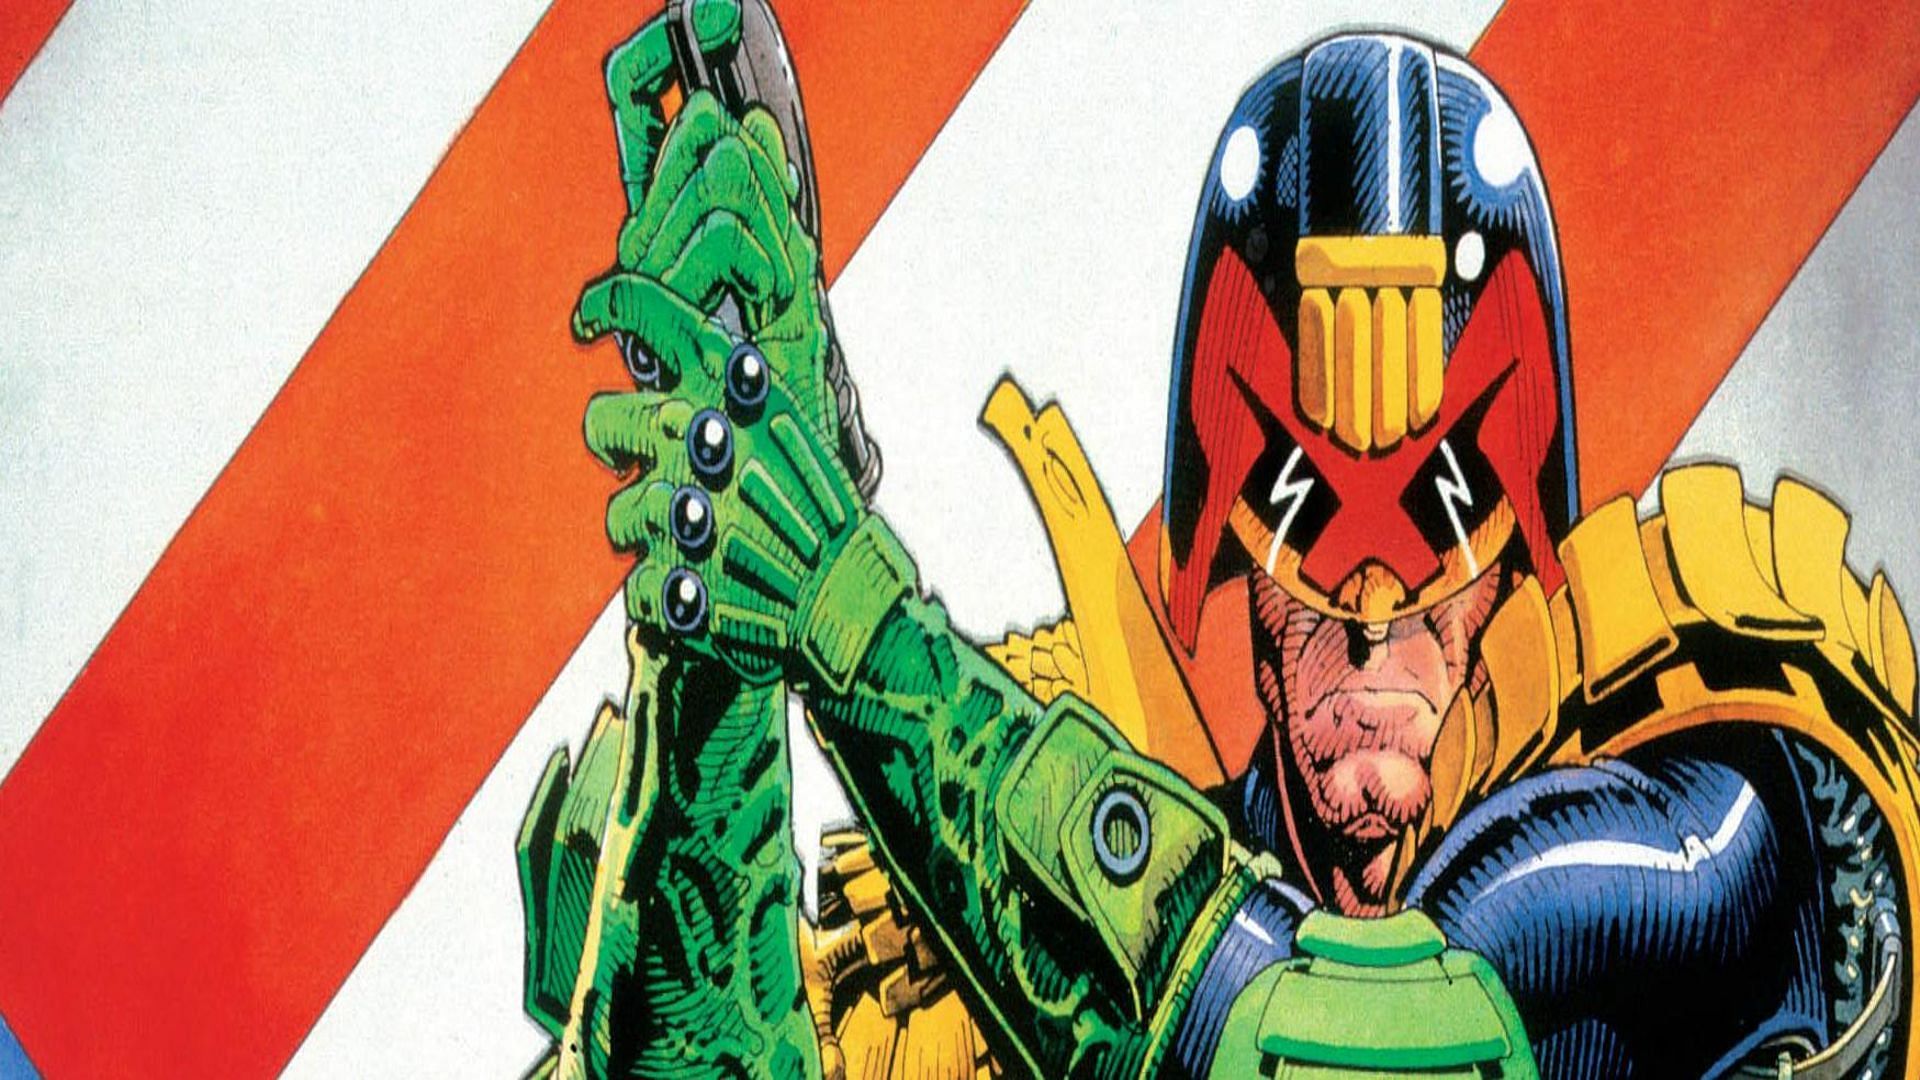 He is the law (Image via 2000 AD)